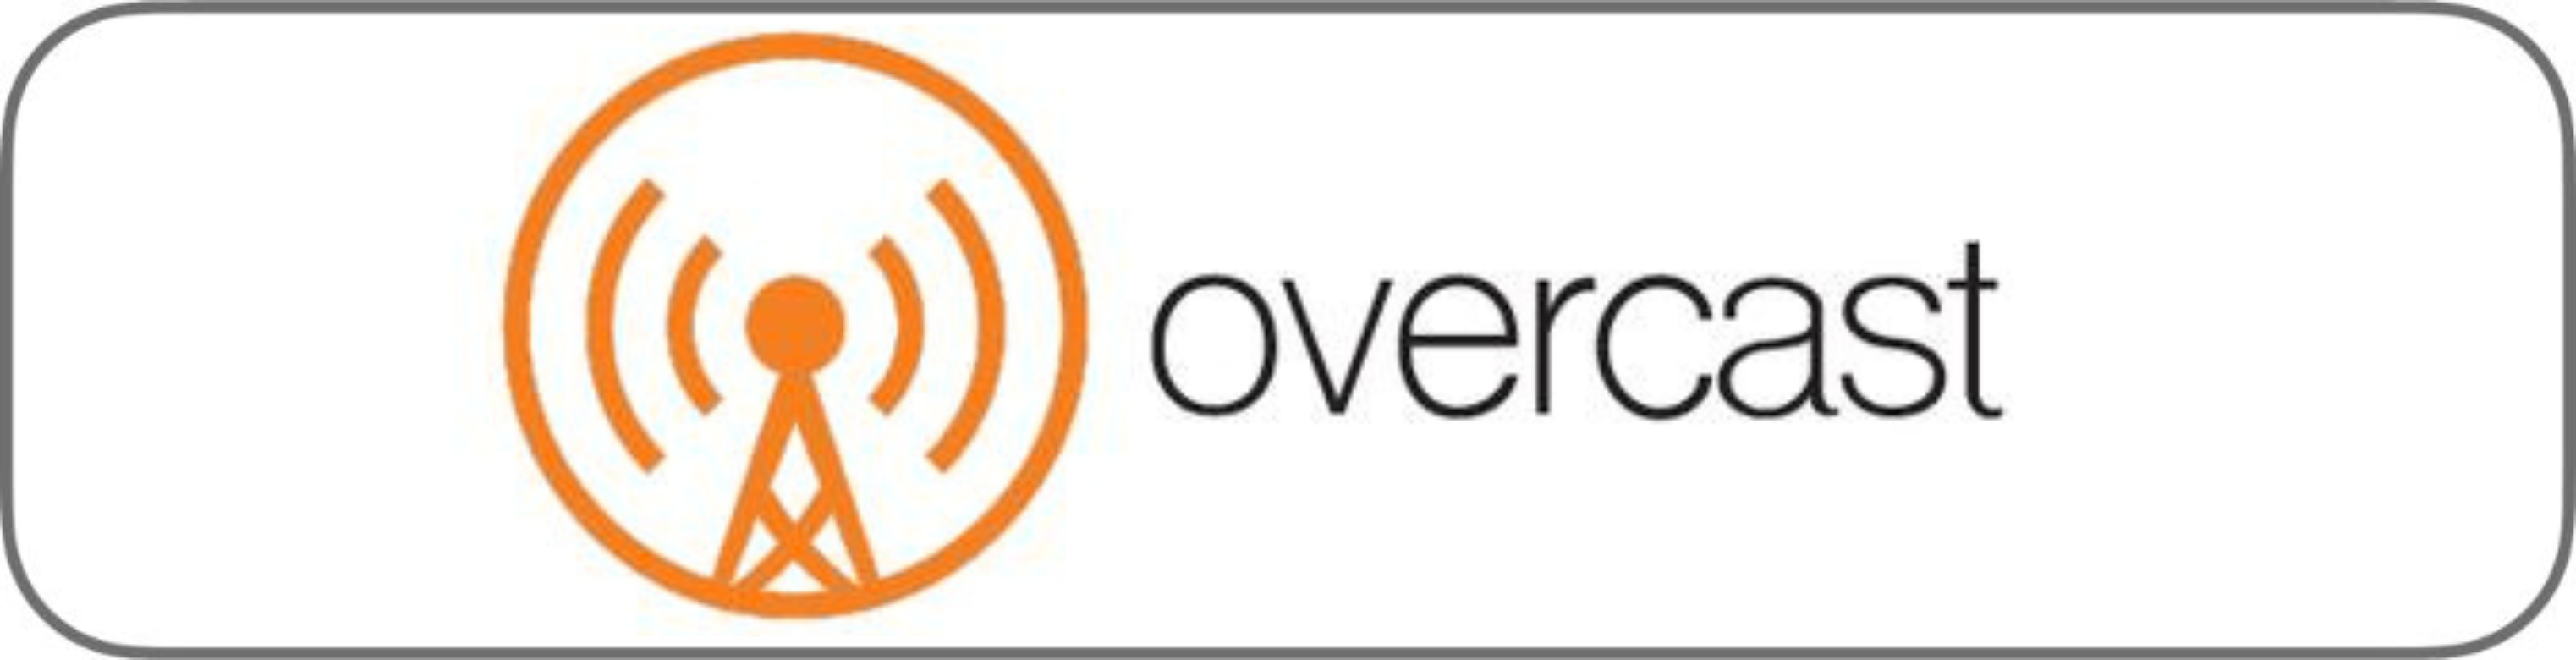 Overcast - The Employee Advocacy & Influence Podcast by DSMN8